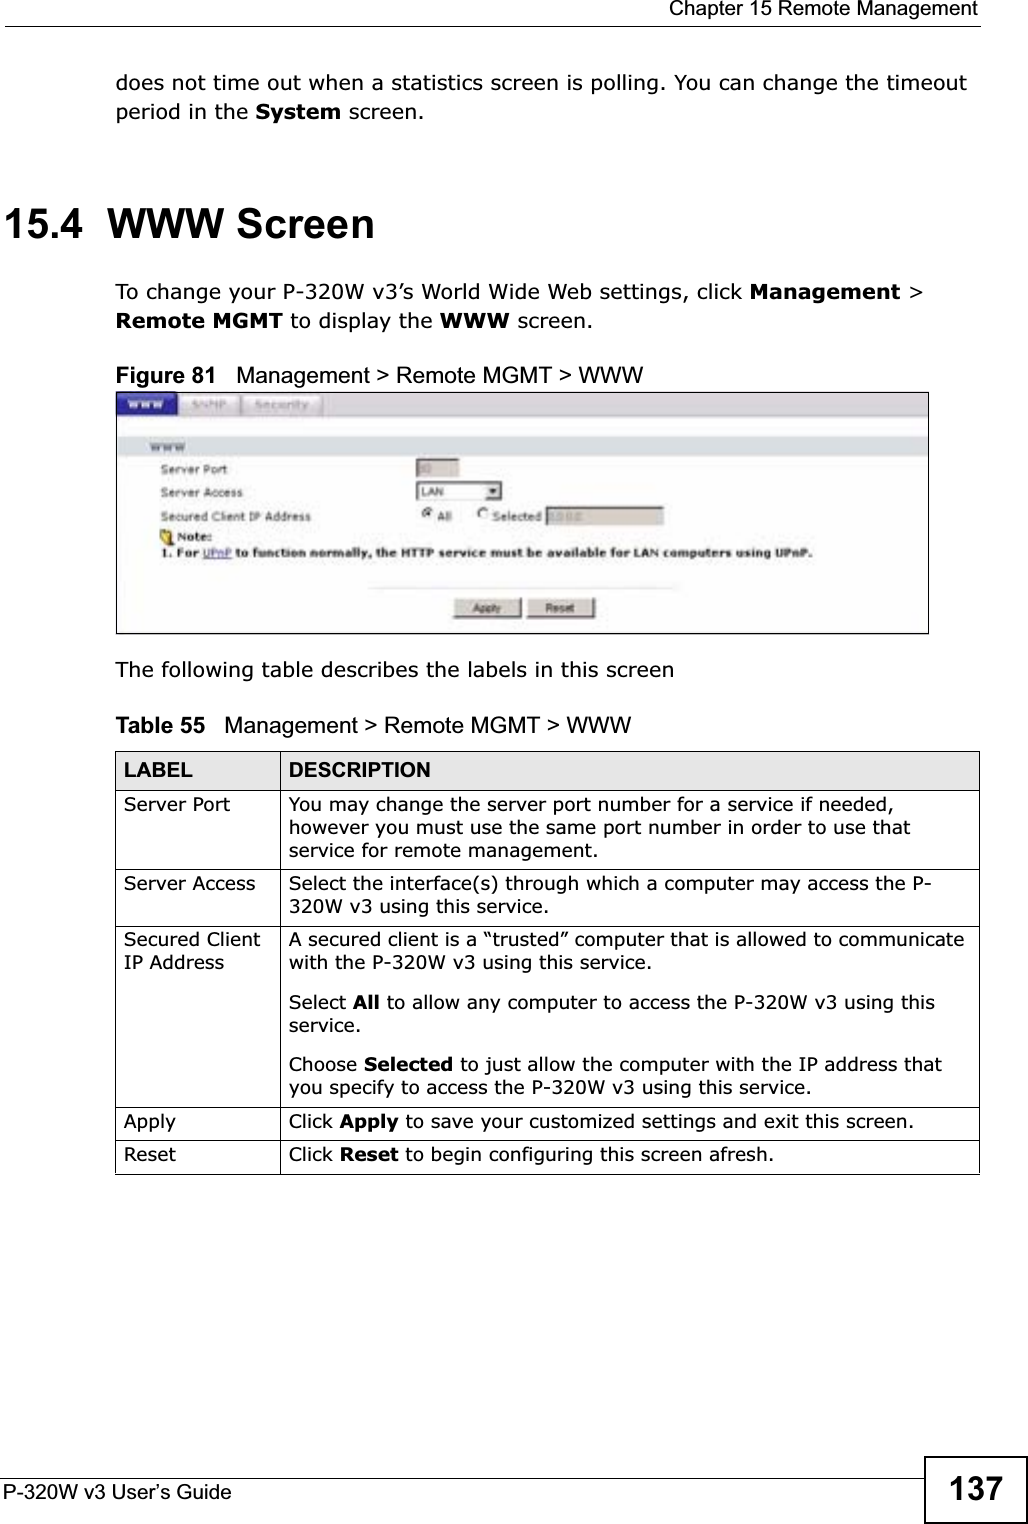  Chapter 15 Remote ManagementP-320W v3 User’s Guide 137does not time out when a statistics screen is polling. You can change the timeout period in the System screen.15.4  WWW ScreenTo change your P-320W v3’s World Wide Web settings, click Management &gt; Remote MGMT to display the WWW screen.Figure 81   Management &gt; Remote MGMT &gt; WWW The following table describes the labels in this screenTable 55   Management &gt; Remote MGMT &gt; WWWLABEL DESCRIPTIONServer Port You may change the server port number for a service if needed, however you must use the same port number in order to use that service for remote management.Server Access Select the interface(s) through which a computer may access the P-320W v3 using this service.Secured Client IP AddressA secured client is a “trusted” computer that is allowed to communicate with the P-320W v3 using this service. Select All to allow any computer to access the P-320W v3 using this service.Choose Selected to just allow the computer with the IP address that you specify to access the P-320W v3 using this service.Apply Click Apply to save your customized settings and exit this screen. Reset Click Reset to begin configuring this screen afresh.